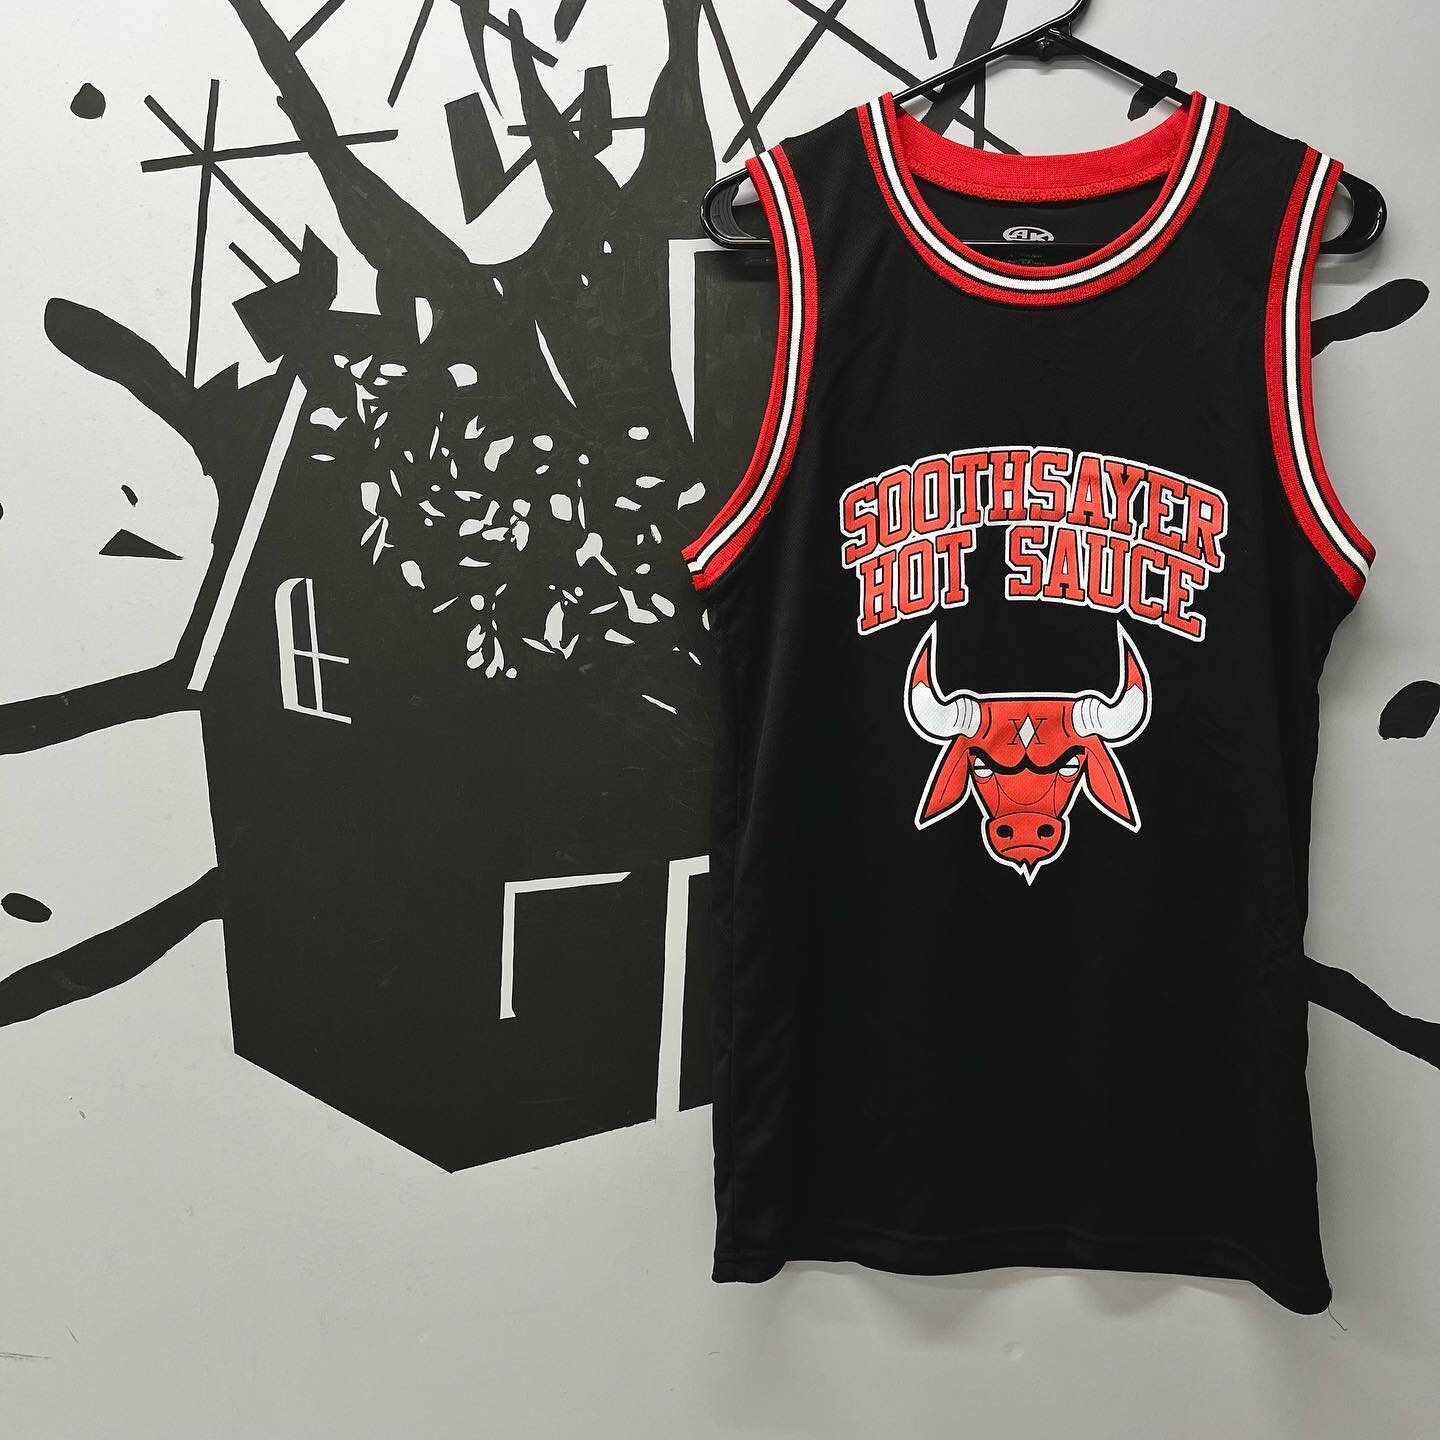 There goes @soothsayerhotsauce dunking on the merch game yet again, don&rsquo;t mind them 🌶️🏀🌶️
💥🏠💥

#explodinghouseprinting #soothsayerhotsauce #hotsauce #pantone #stayspicy #chicagoscreenprinting #soothsayer #chicago #chicagobulls #dunk  #chi